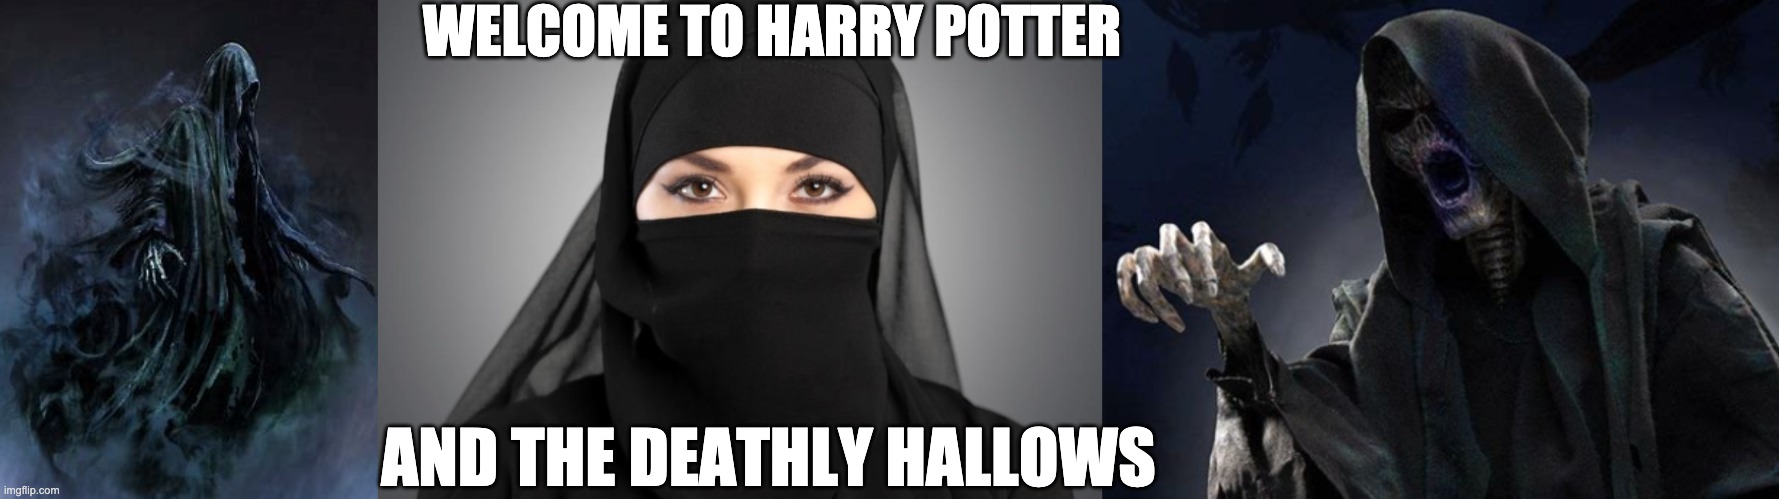 Muslim Women be like the DEMENTORS from Harry Potter | WELCOME TO HARRY POTTER; AND THE DEATHLY HALLOWS | image tagged in harry potter,confused muslim girl,memes,dank memes,harry potter meme,ghost | made w/ Imgflip meme maker